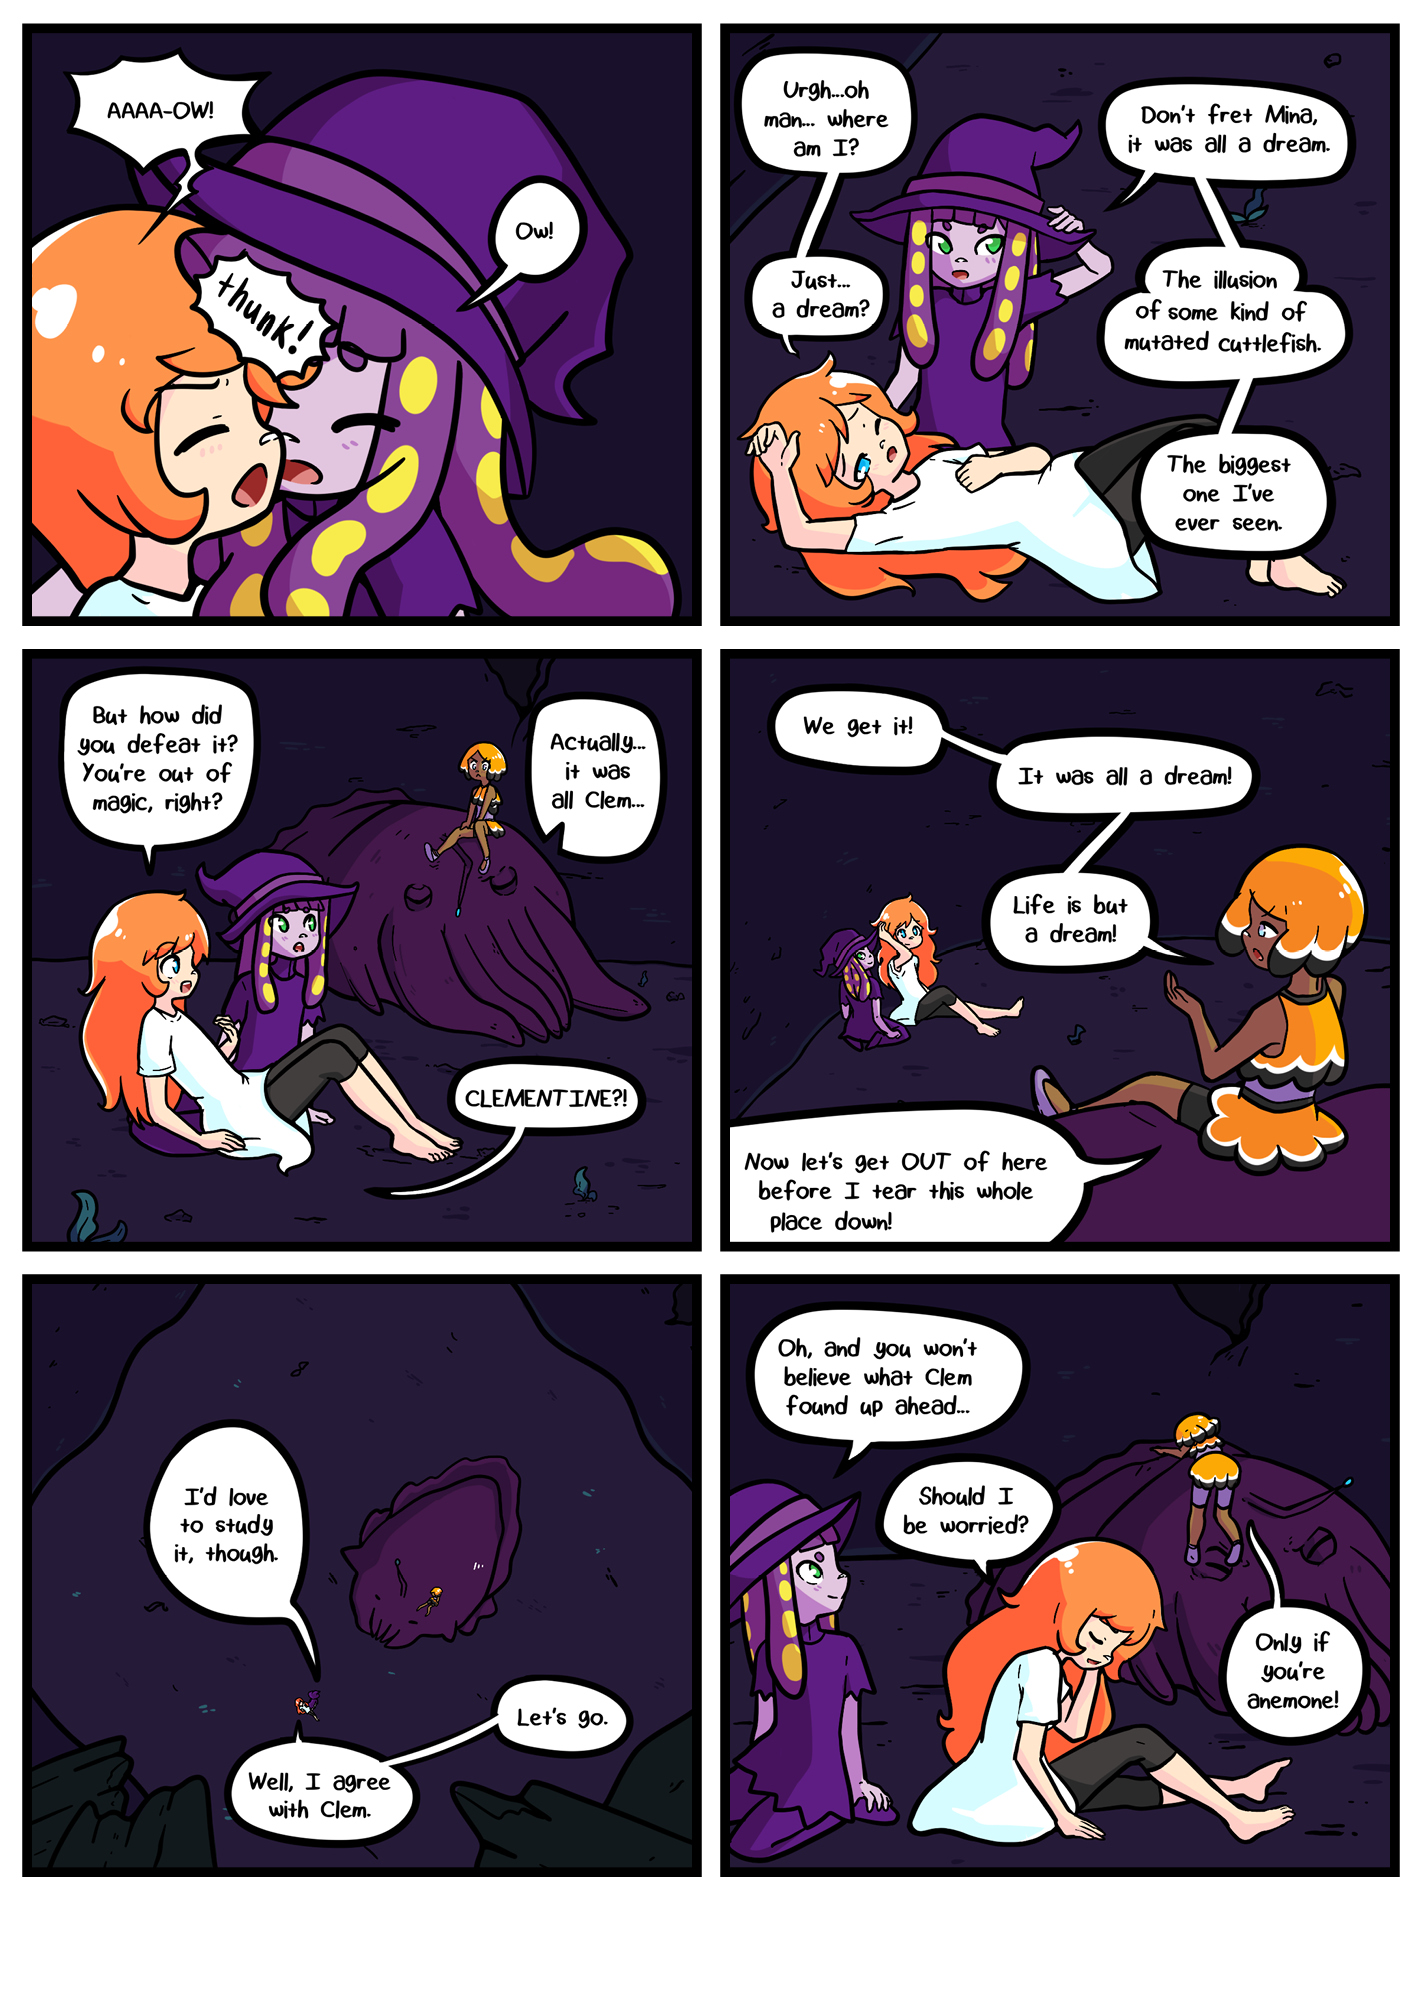 Seasick the underwater adventure comic, chapter 2 page 78 full page